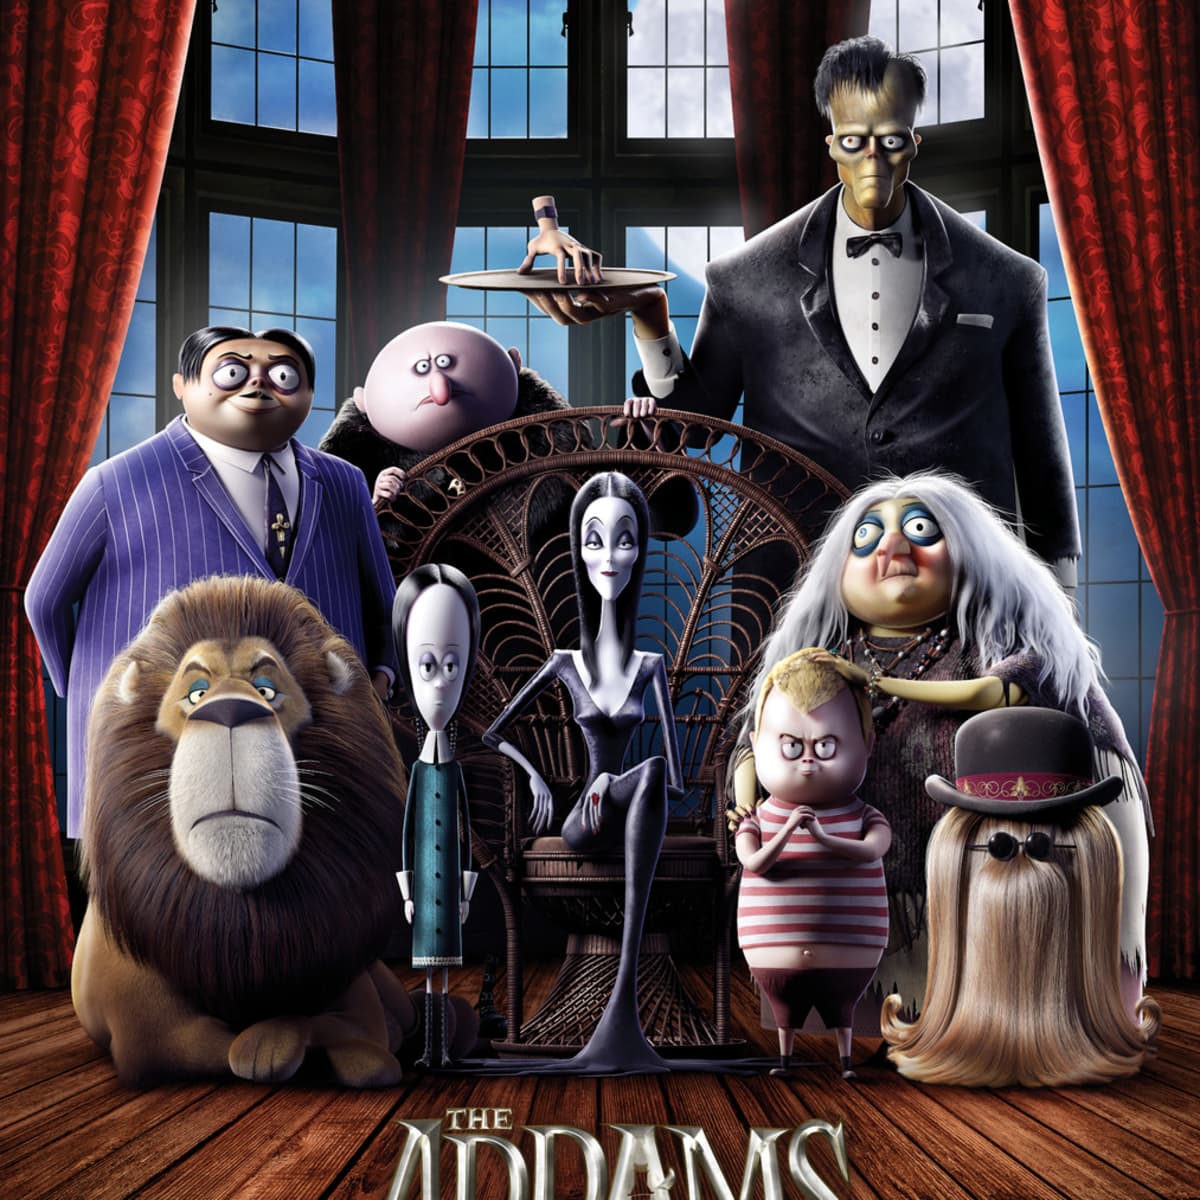 Addams Family Toon Porn - The Addams Family\